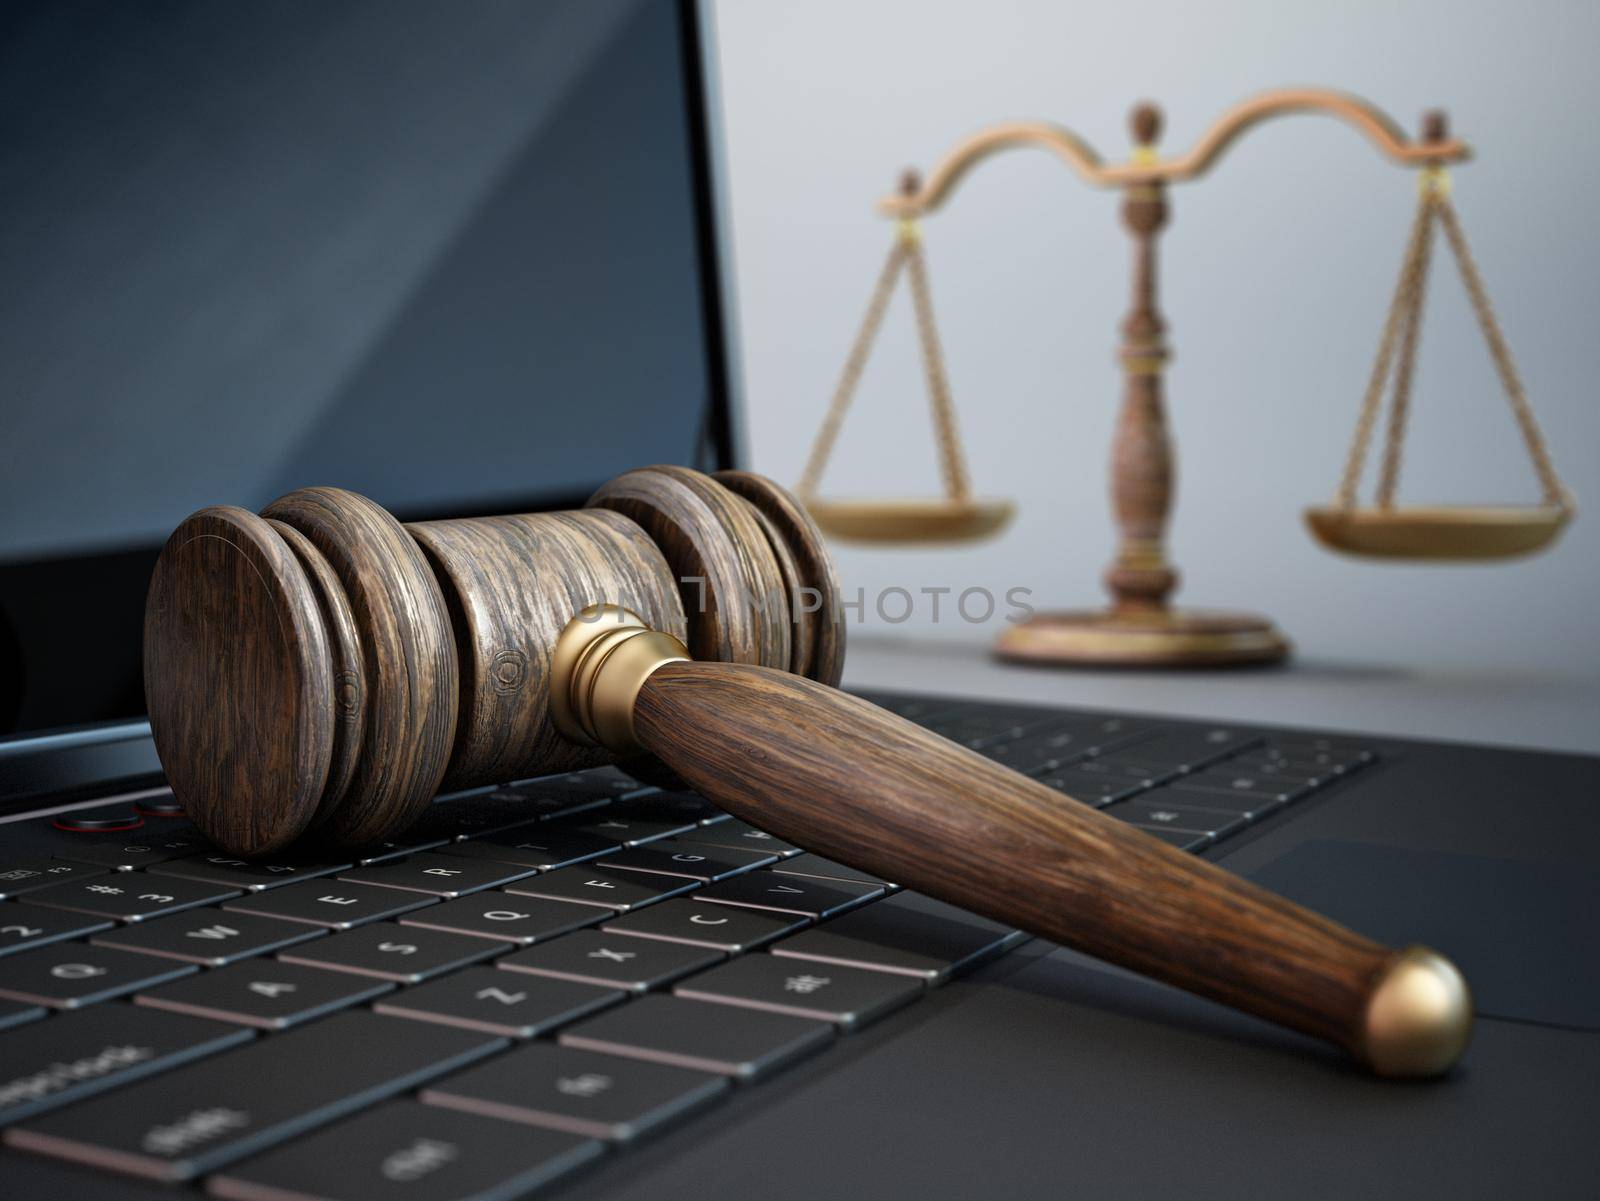 Judge gavel and balanced scale standing on laptop computer keyboard. 3D illustration.